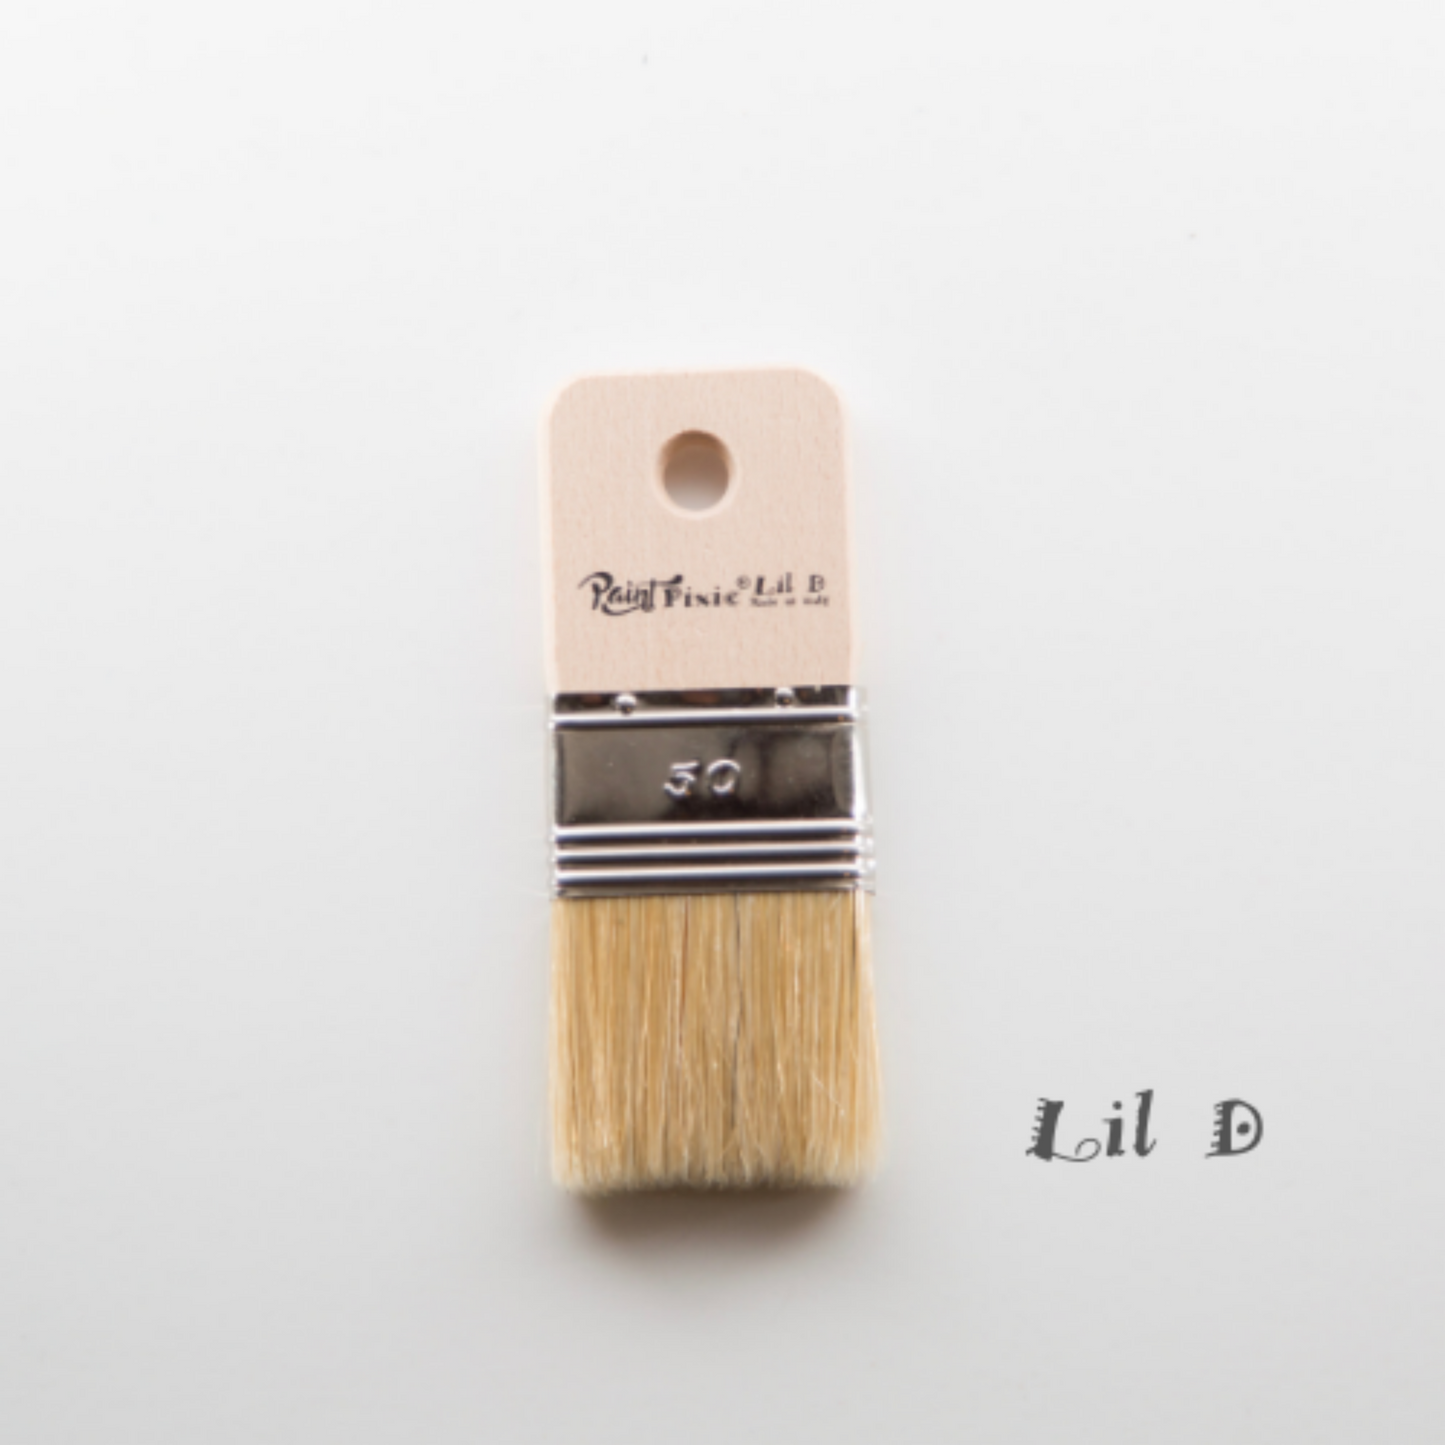 Paint Pixie Lil D Dusty Furniture Paint Brush available at Milton's Daughter